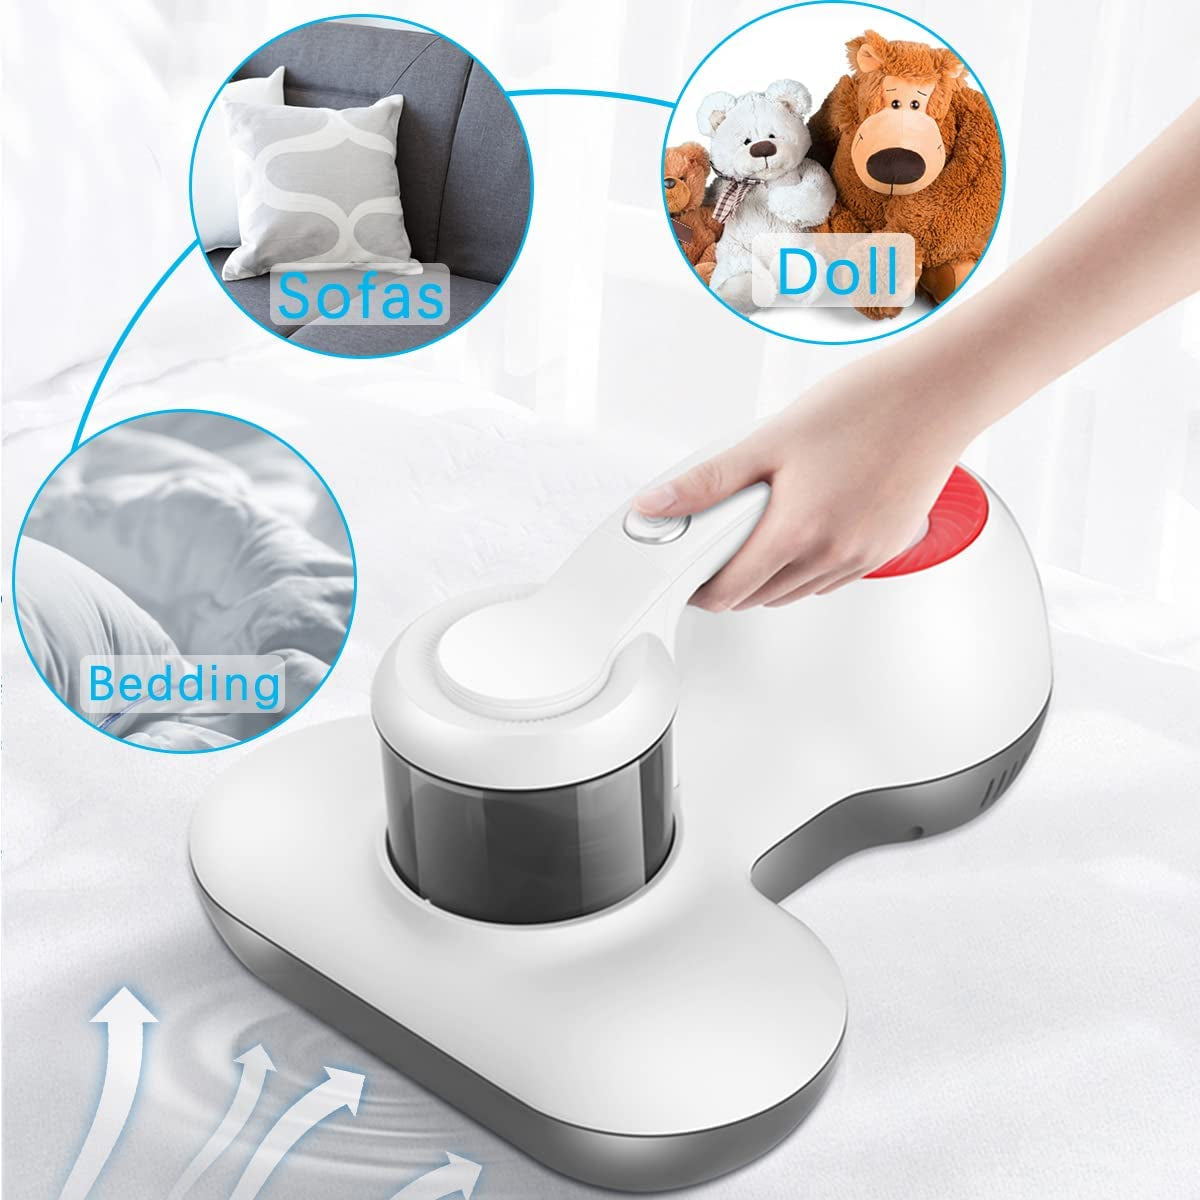 Mattress Vacuum Cleaner, UV Bed Cleaner 12Kpa Handheld Upgraded Effectively Clean up Bed, Pillows, Cloth Sofas, Carpets and Ther Fabric Surfaces